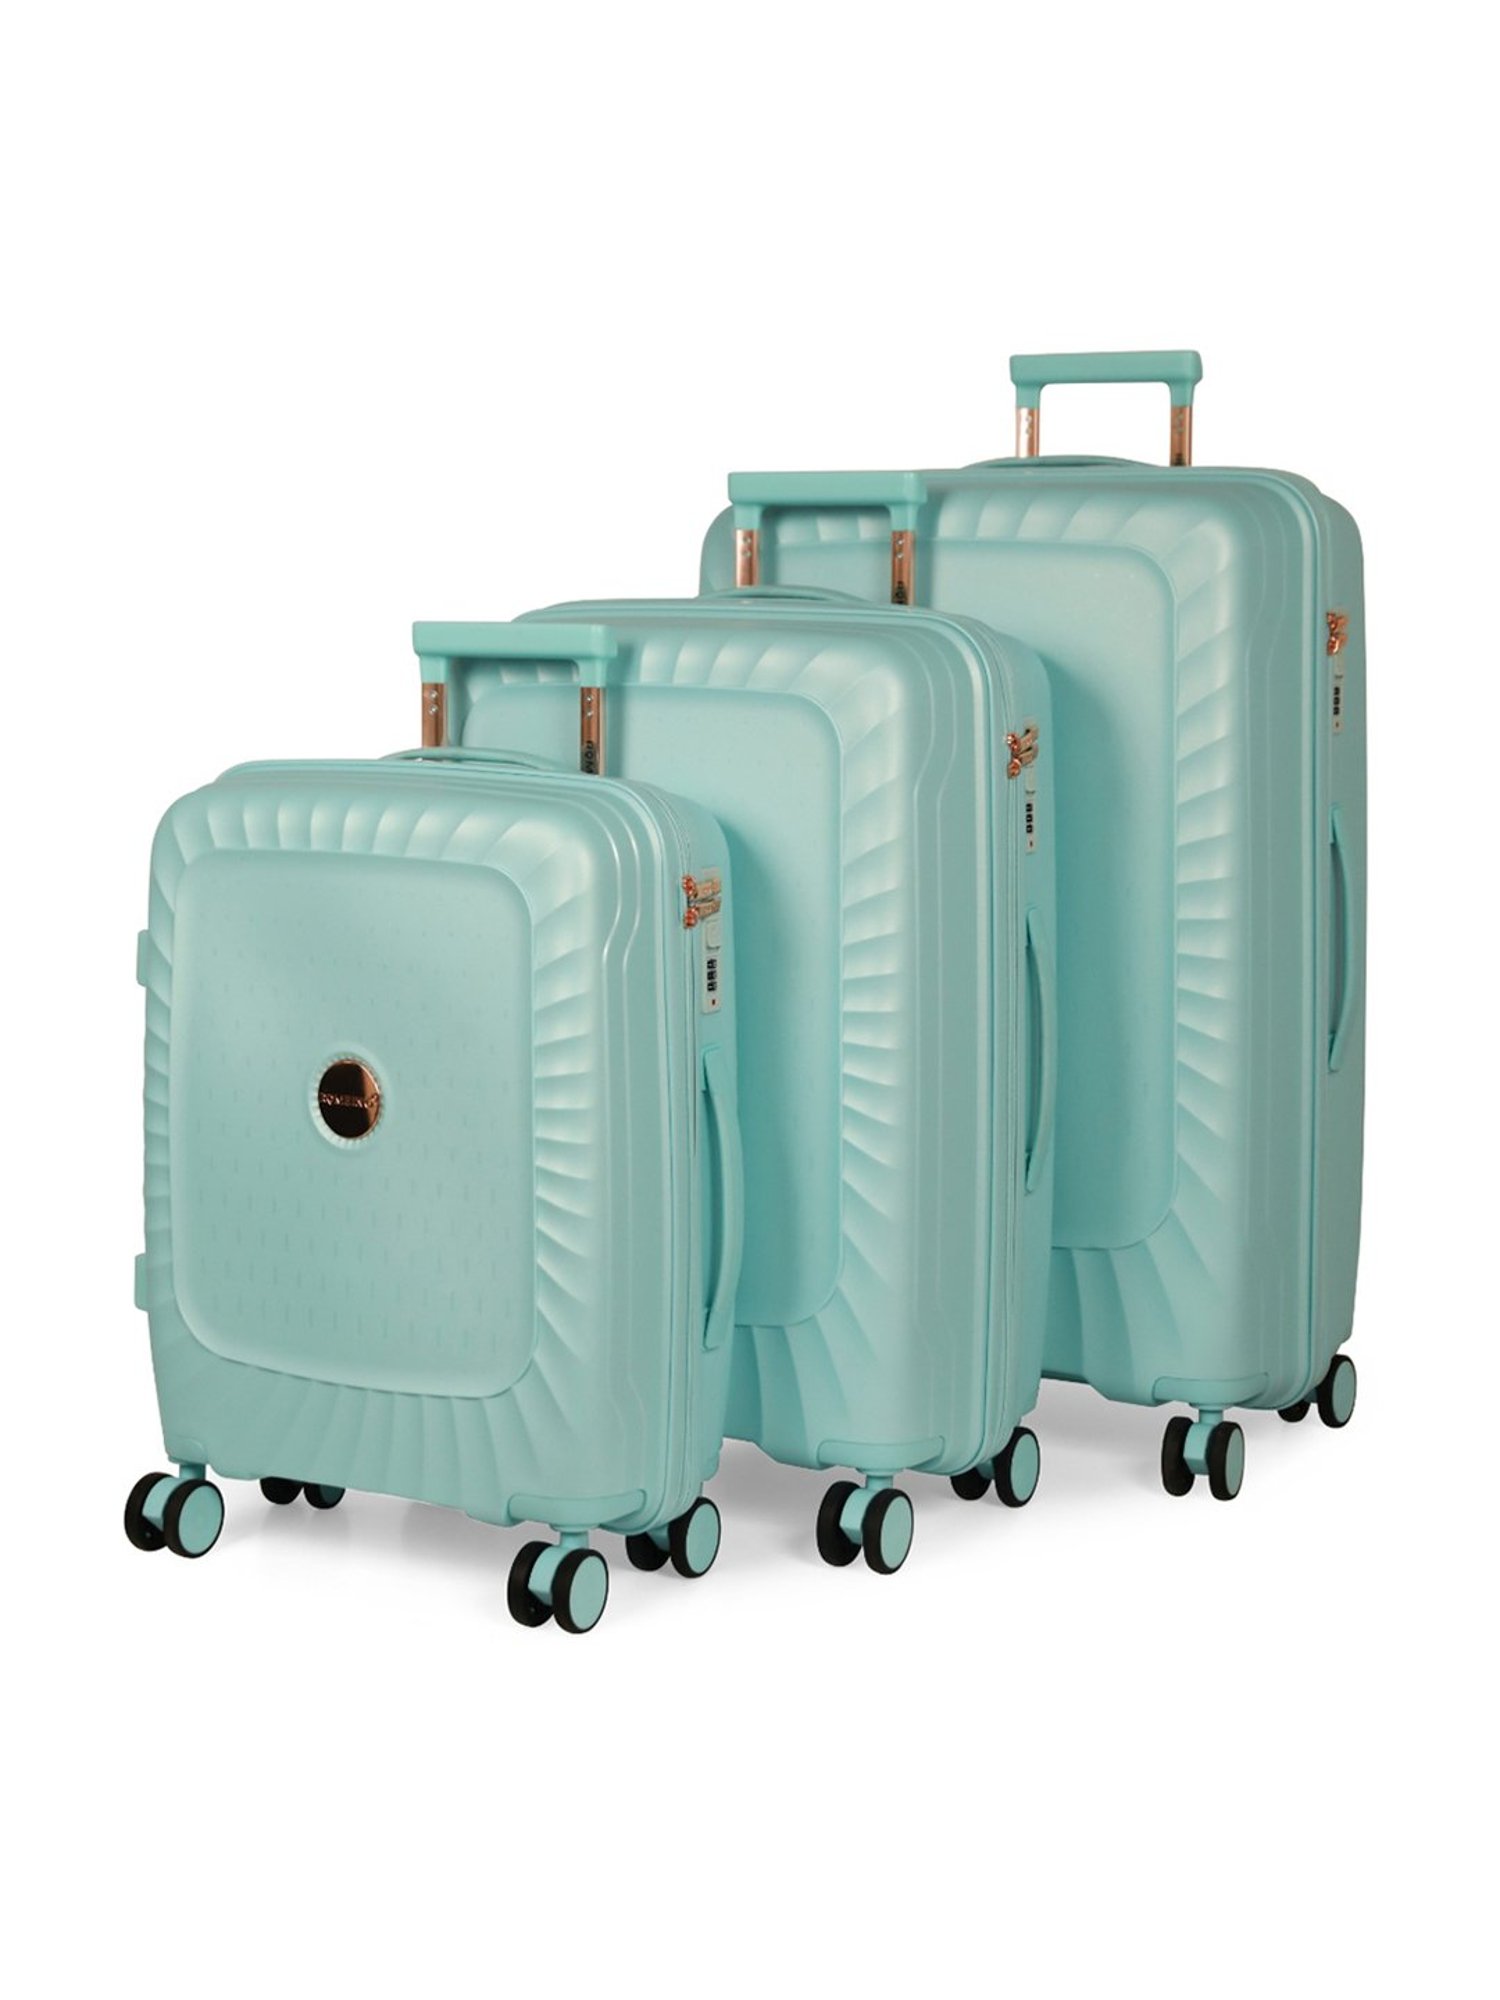 ROMEING Genoa Polycarbonate Hard-sided Luggage Set of 3 Trolley Bags  (RoseGold) (55, 65 & 75 cm) Cabin & Check-in Set 4 Wheels - 28 inch Rose  Gold - Price in India | Flipkart.com